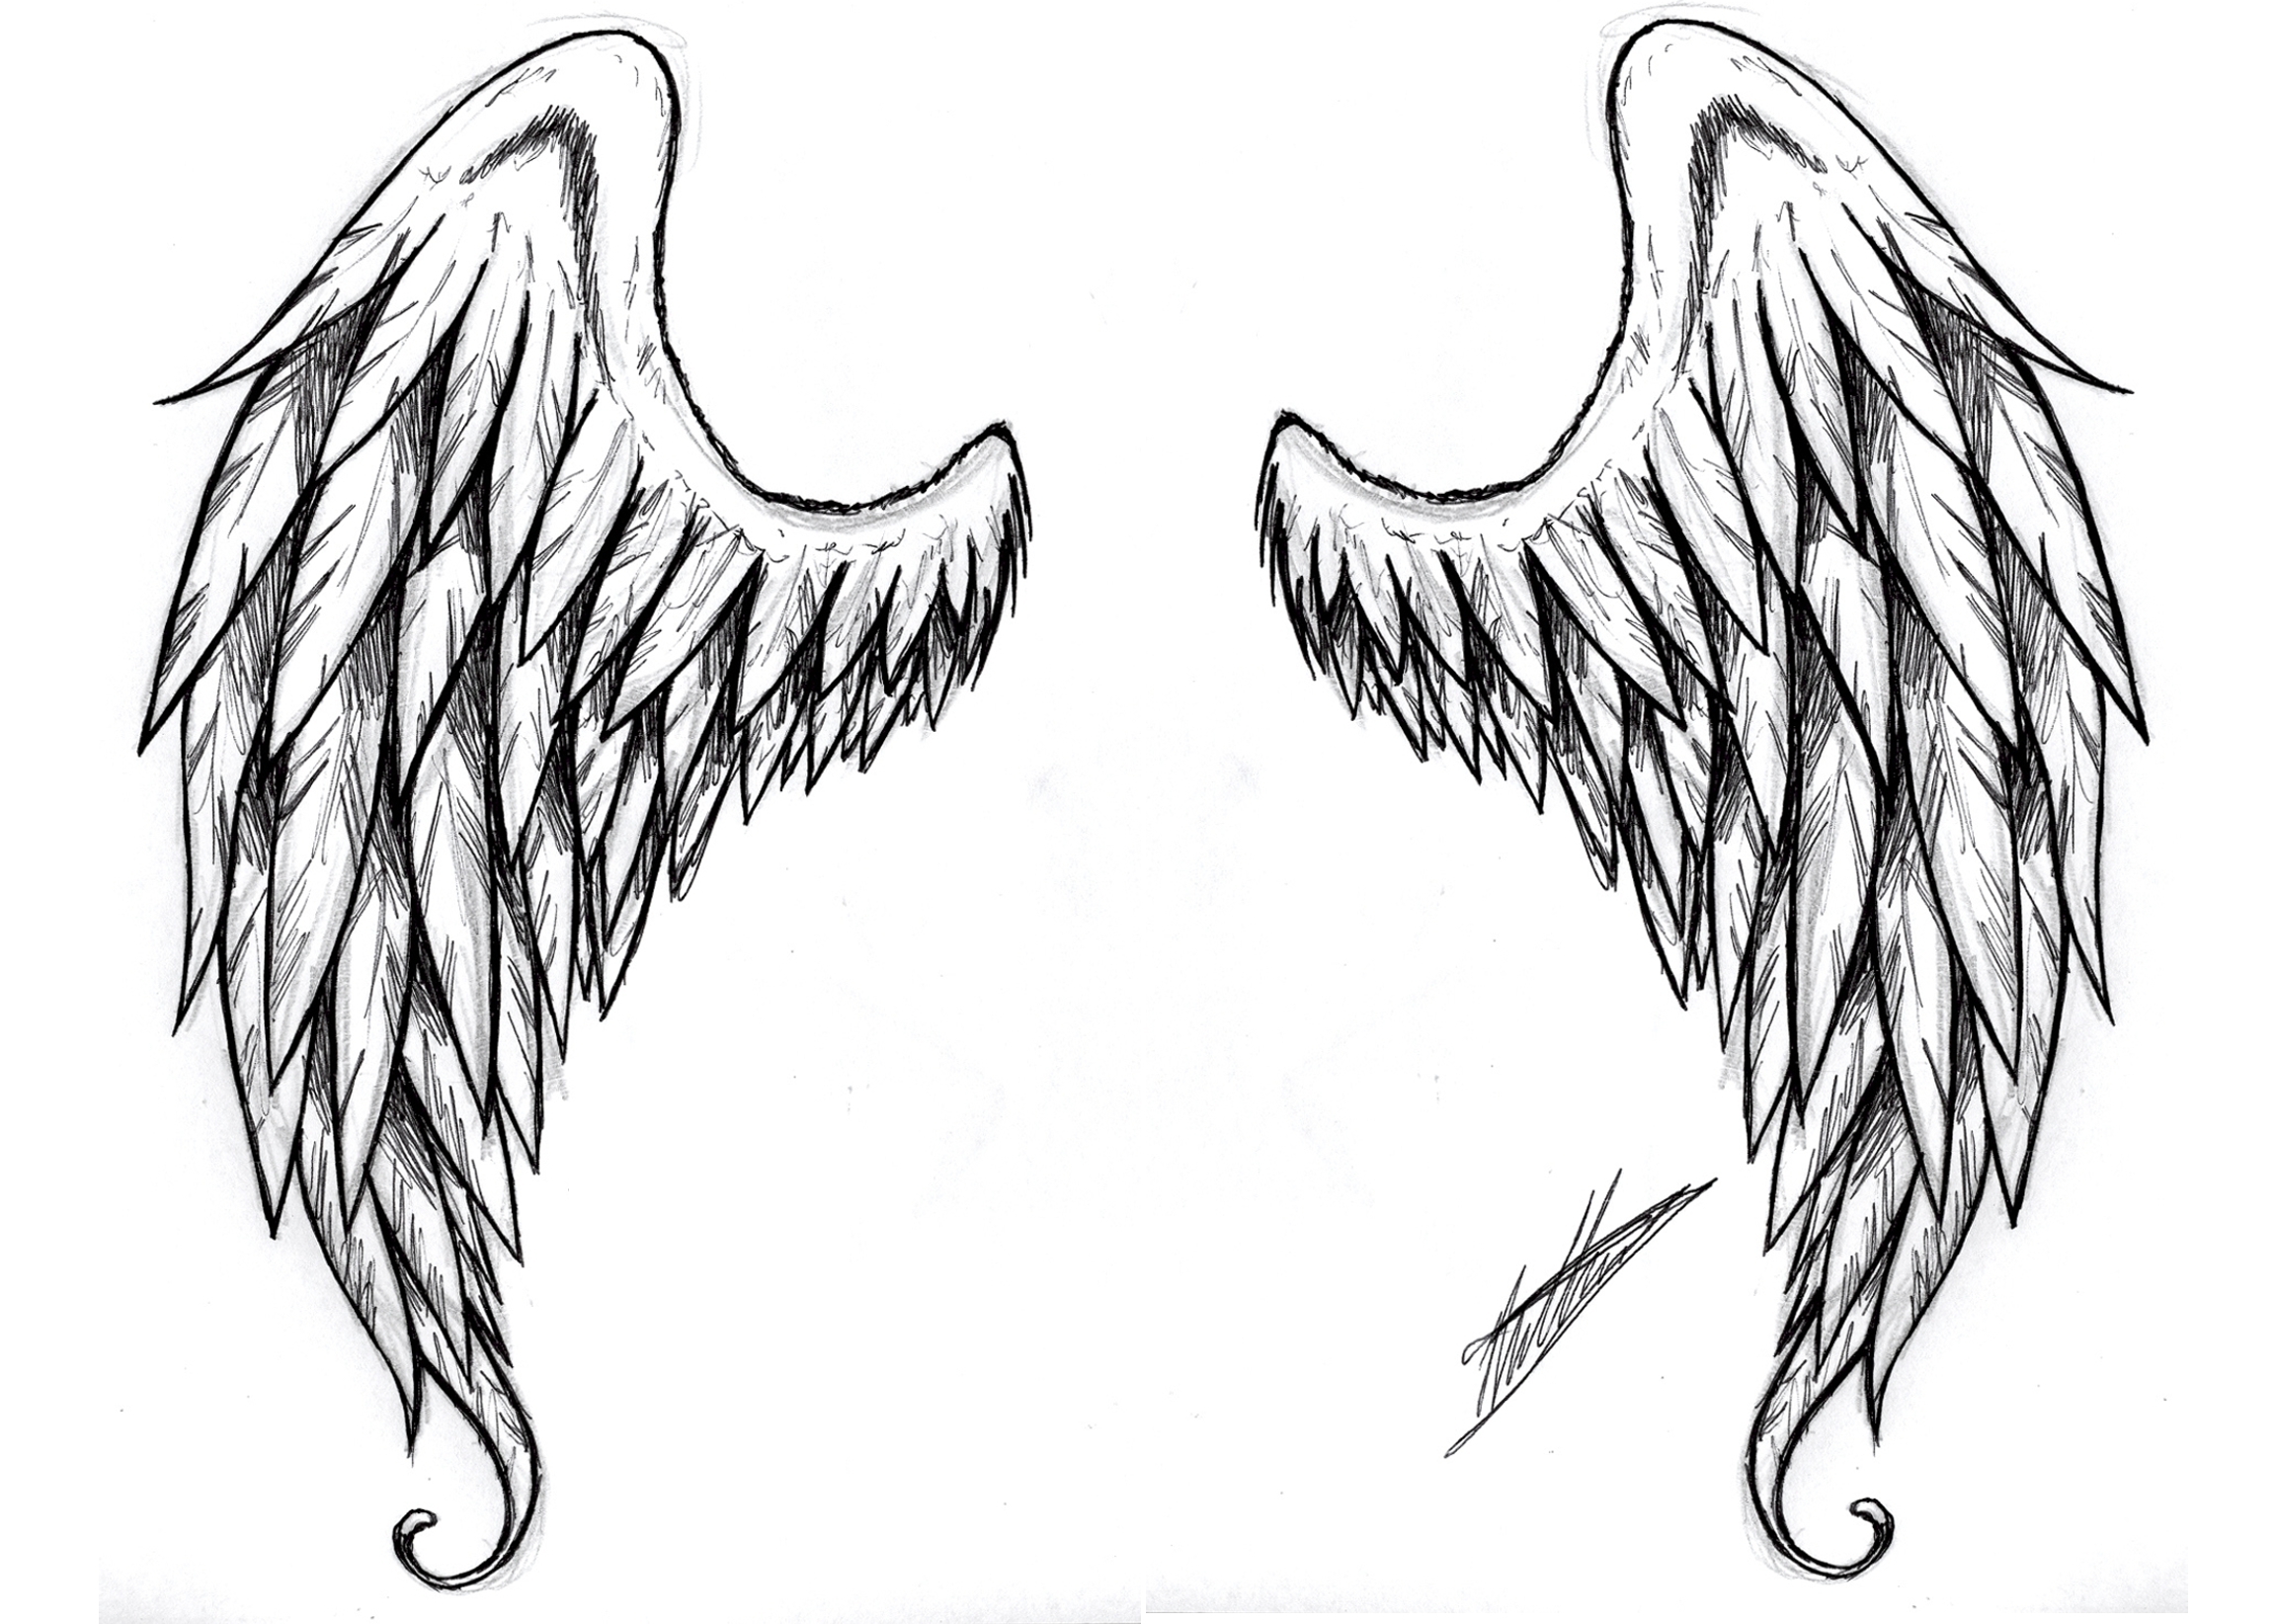 Angel Wing Tattoos Designs Ideas And Meaning   Tattoos For You